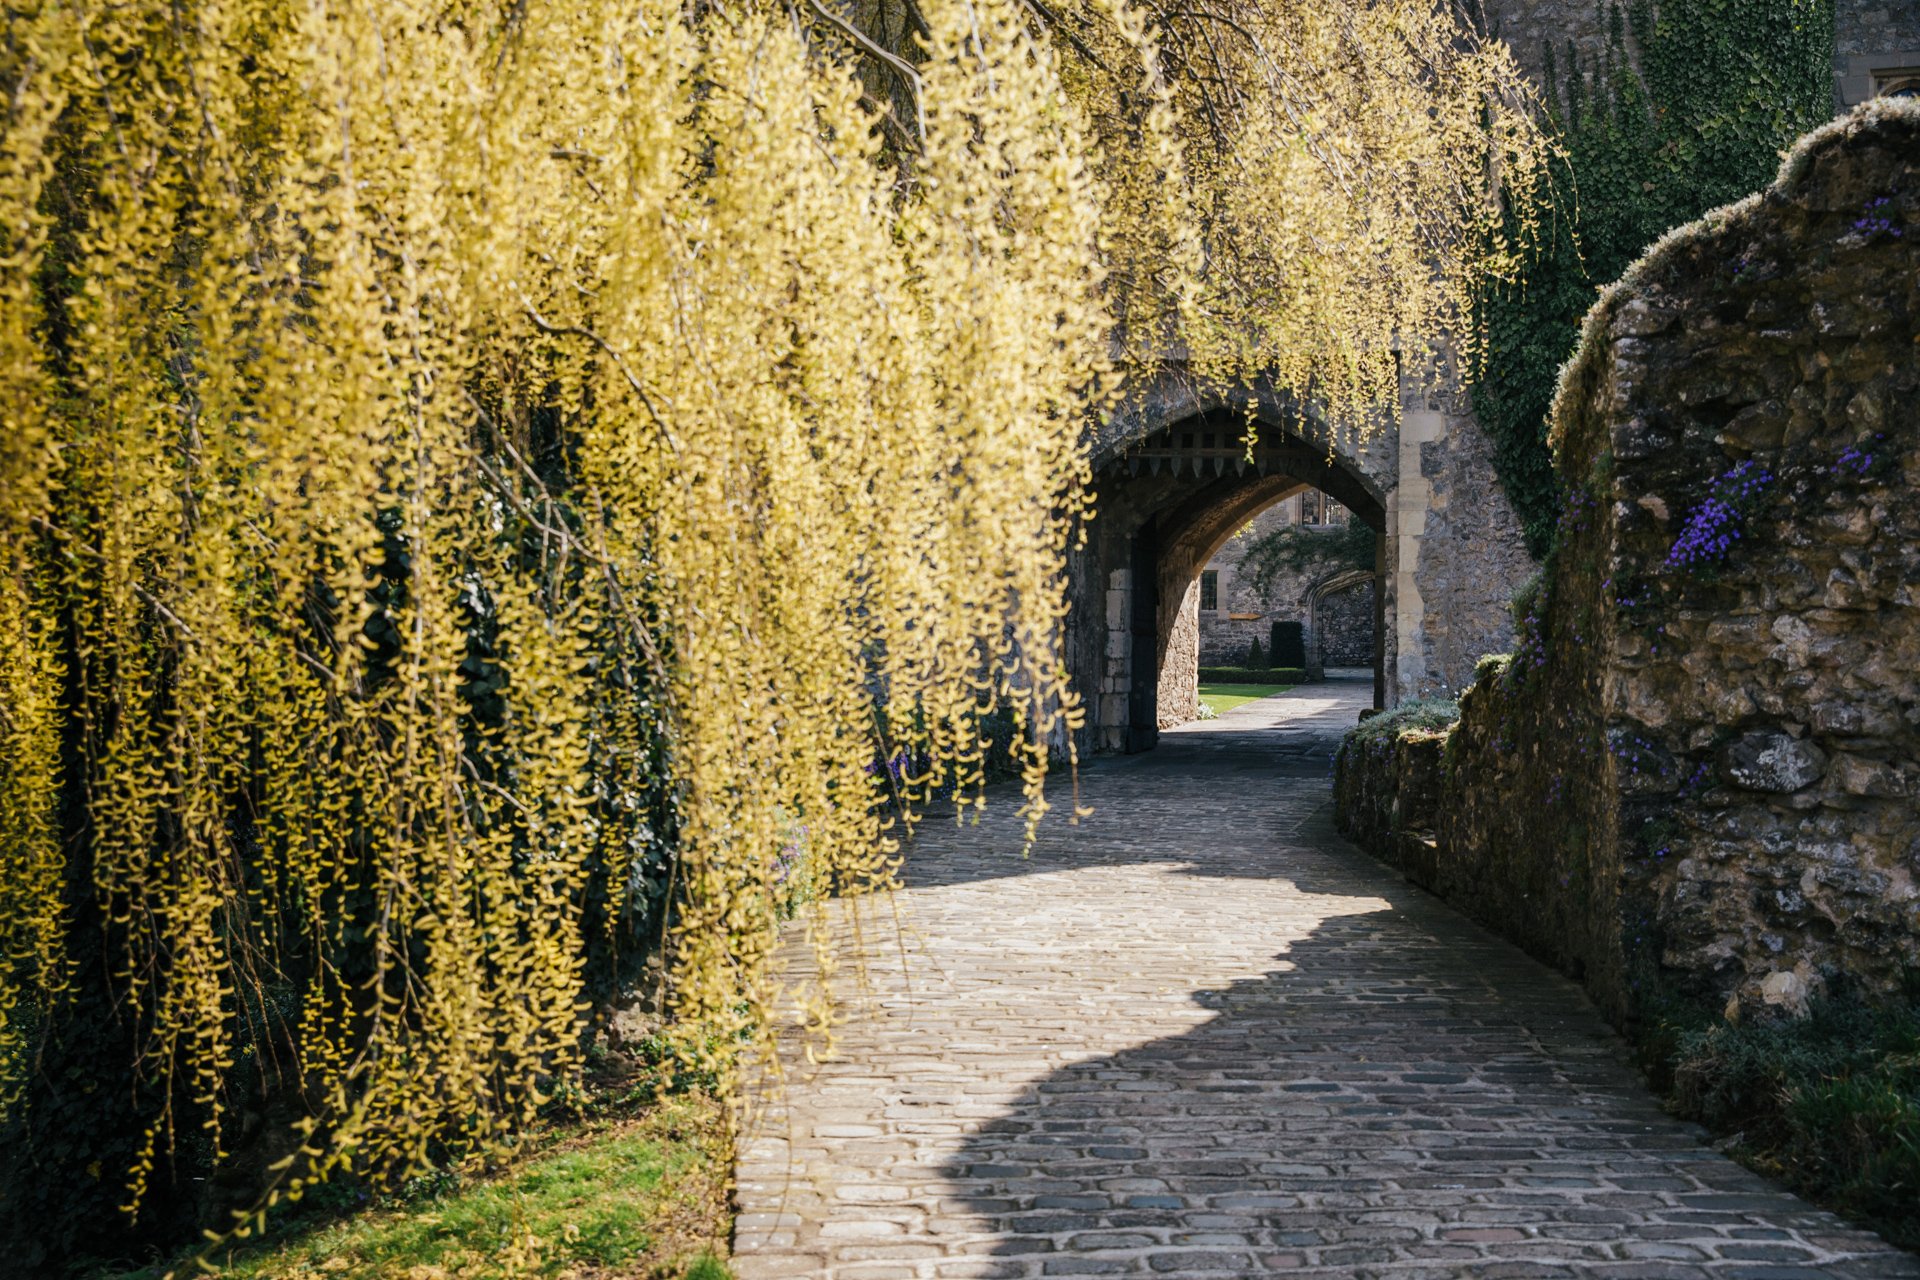 A weeping willow bathed in sunlight in front of the gate of Allington Castle, Kent Wedding Venue